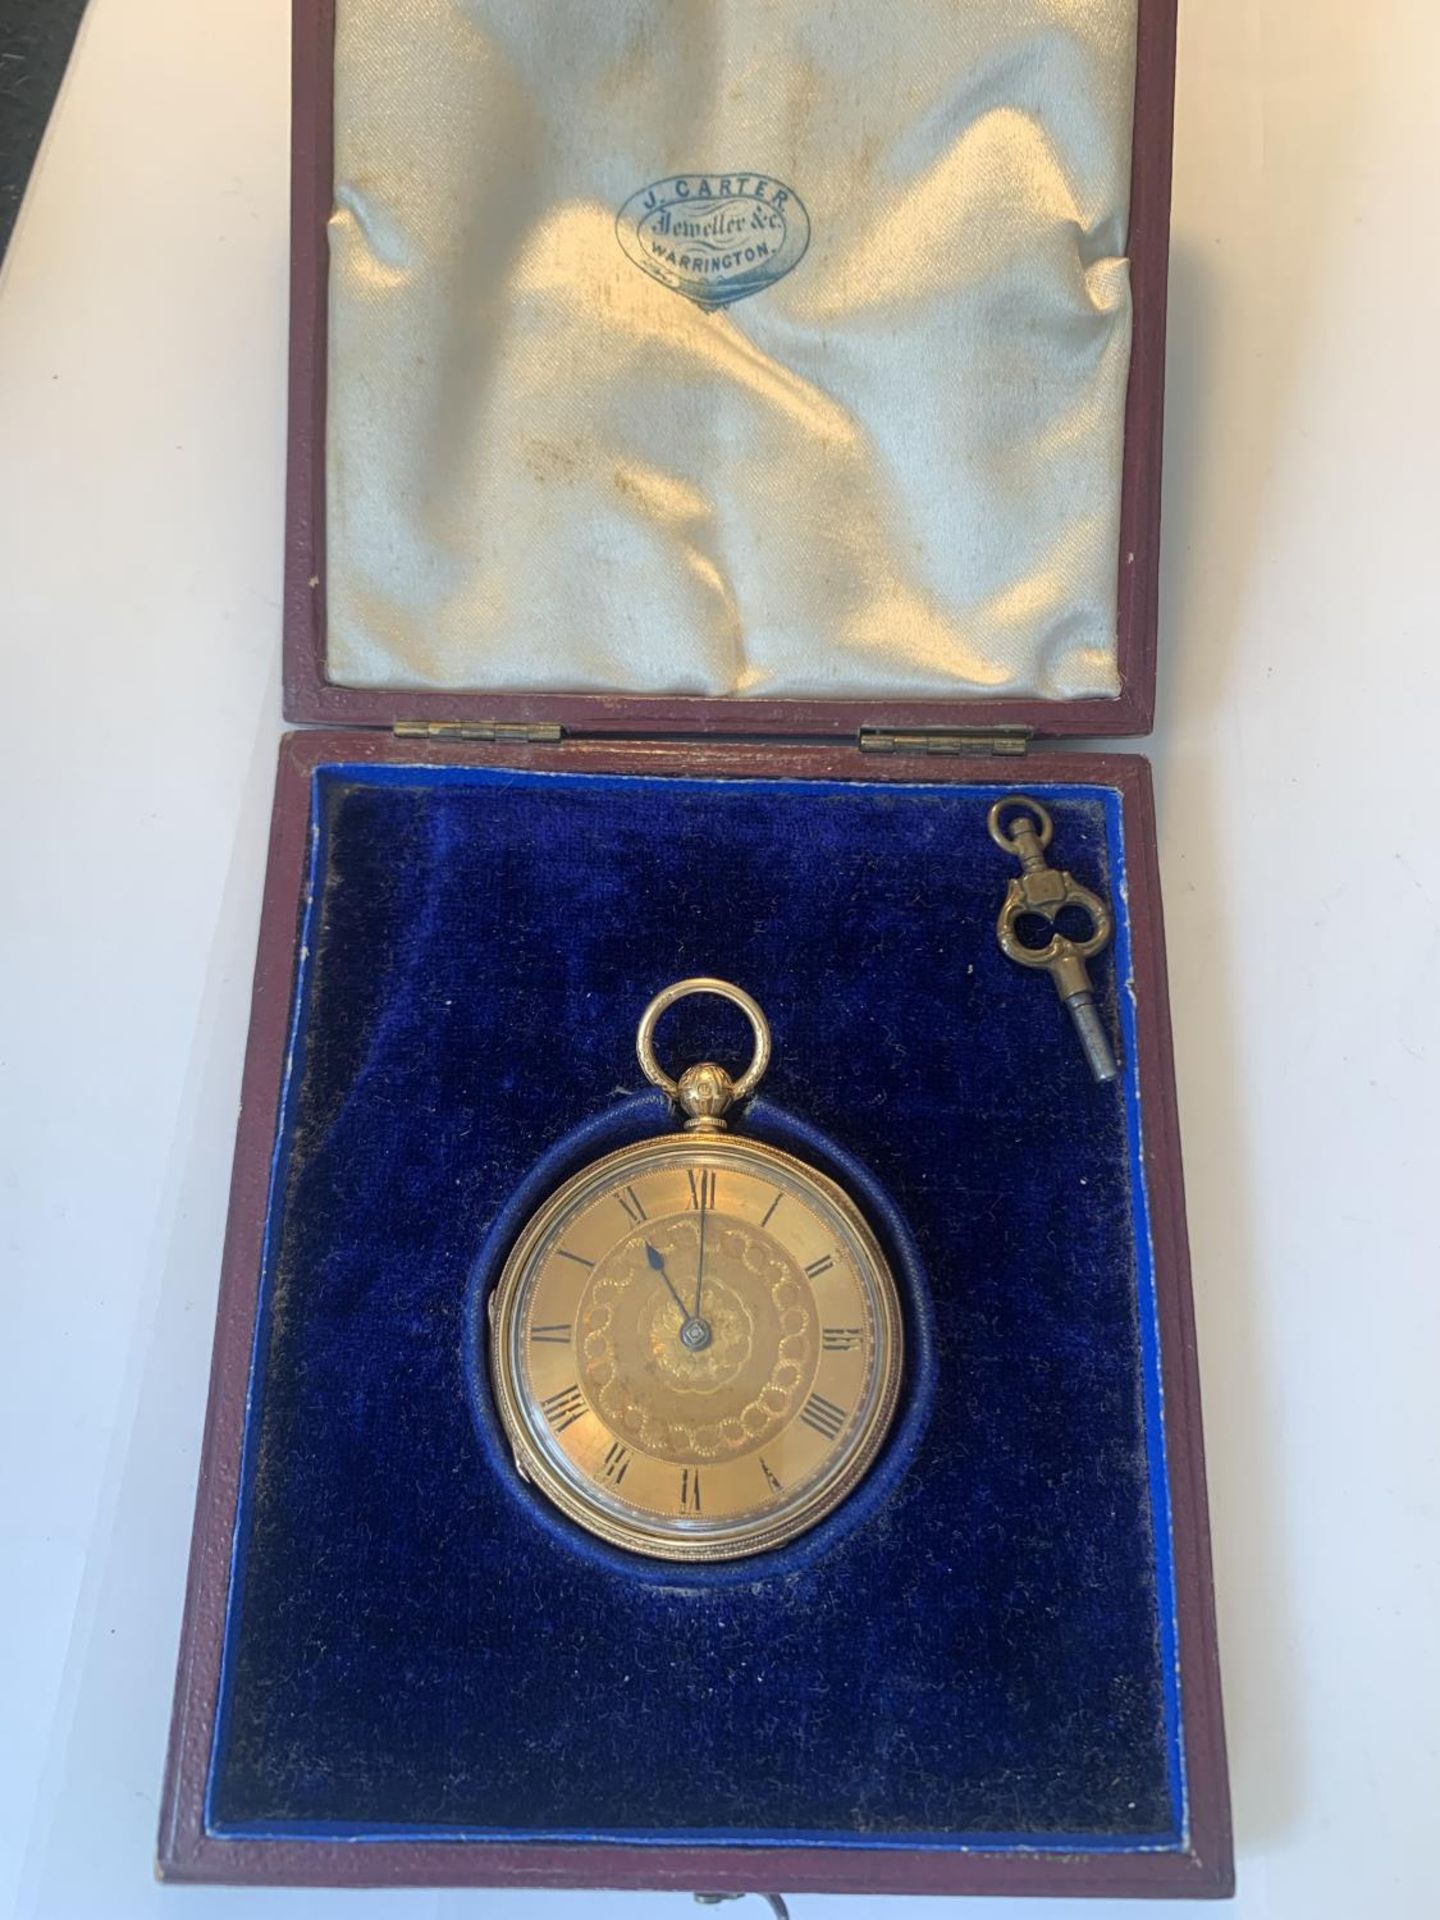 A VINTAGE 18 CARAT GOLD POCKET WATCH WITH DECORATIVE FACE AND ROMAN NUMERALS, KEY AND ORIGINAL BOX